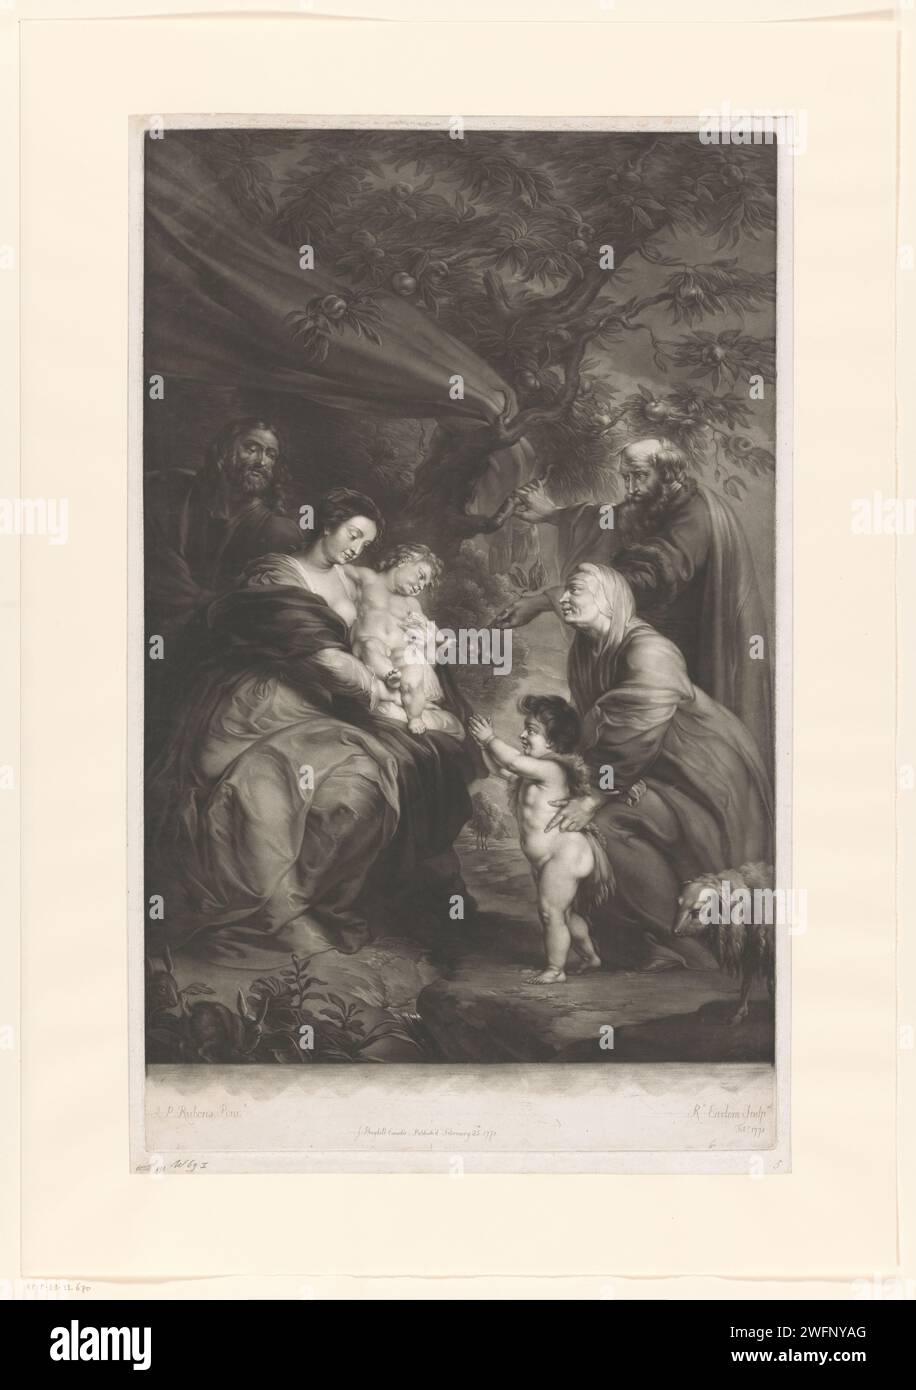 Holy family with Elisabet, Zacharias and Johannes de Baptist as a child, Richard Earlom, after Peter Paul Rubens, 1771 print  London paper  Holy Family with John the Baptist; Elisabeth and Zacharias present Stock Photo